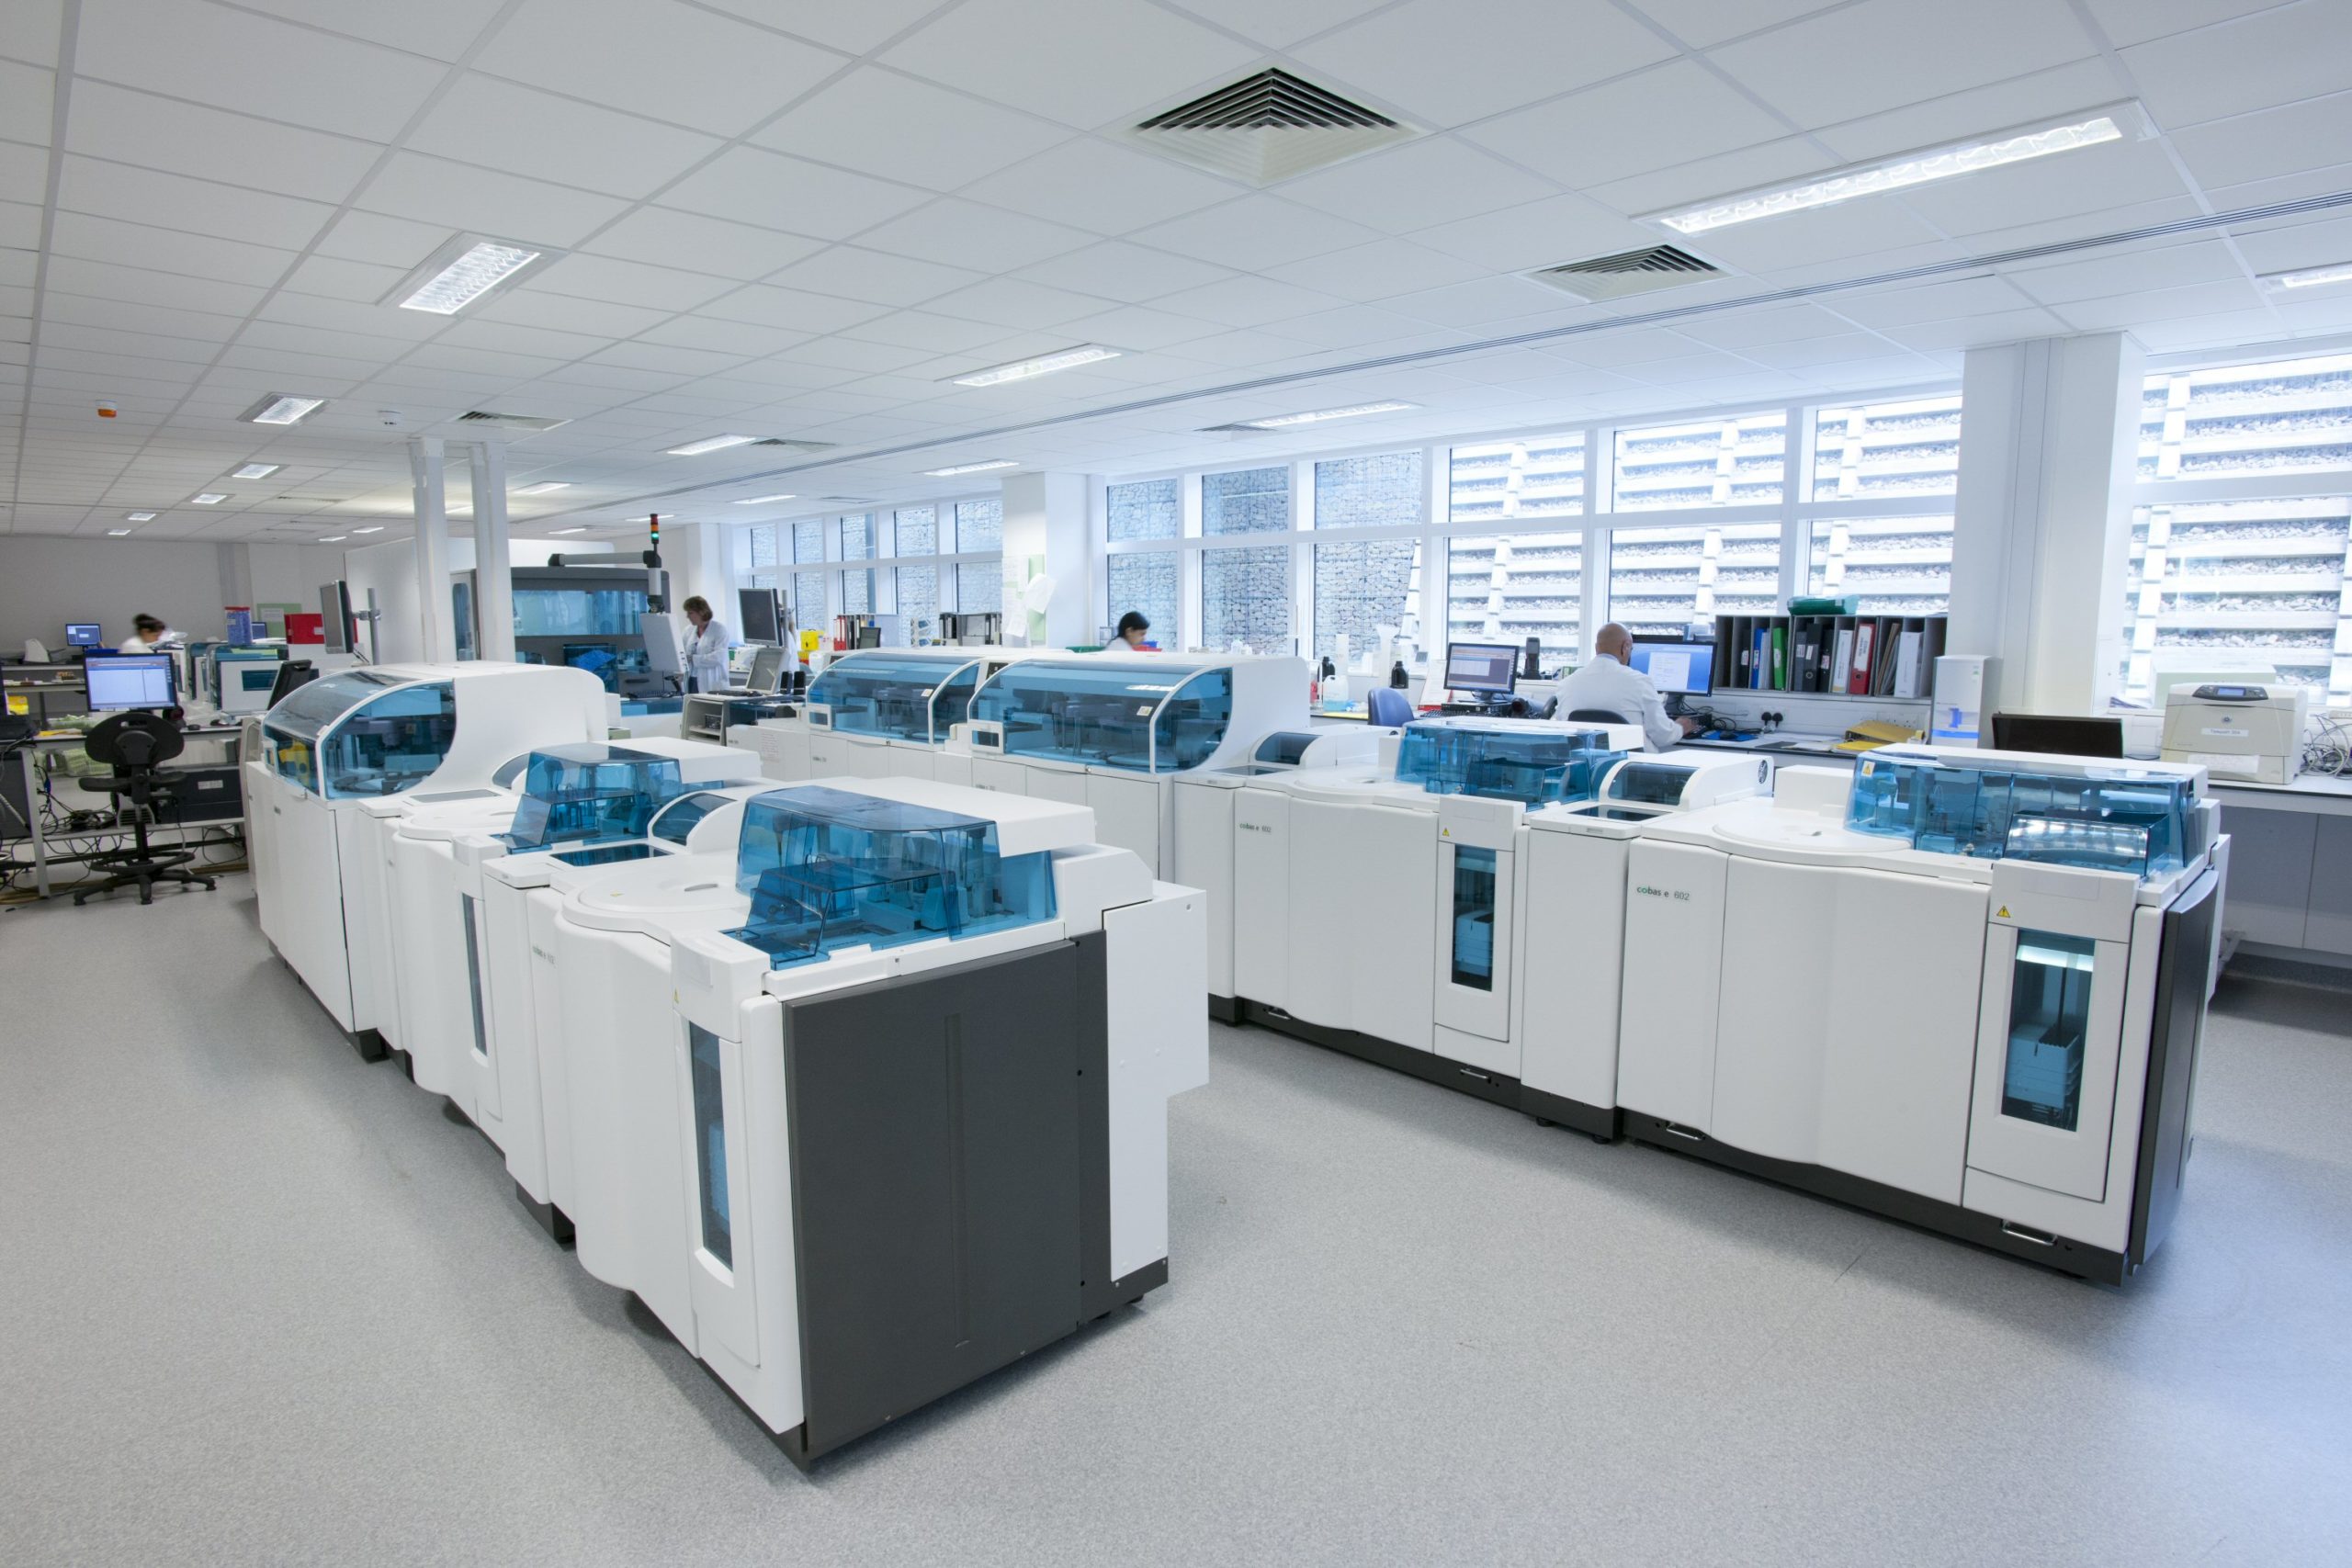 The inside of a laboratory Homediq works with.